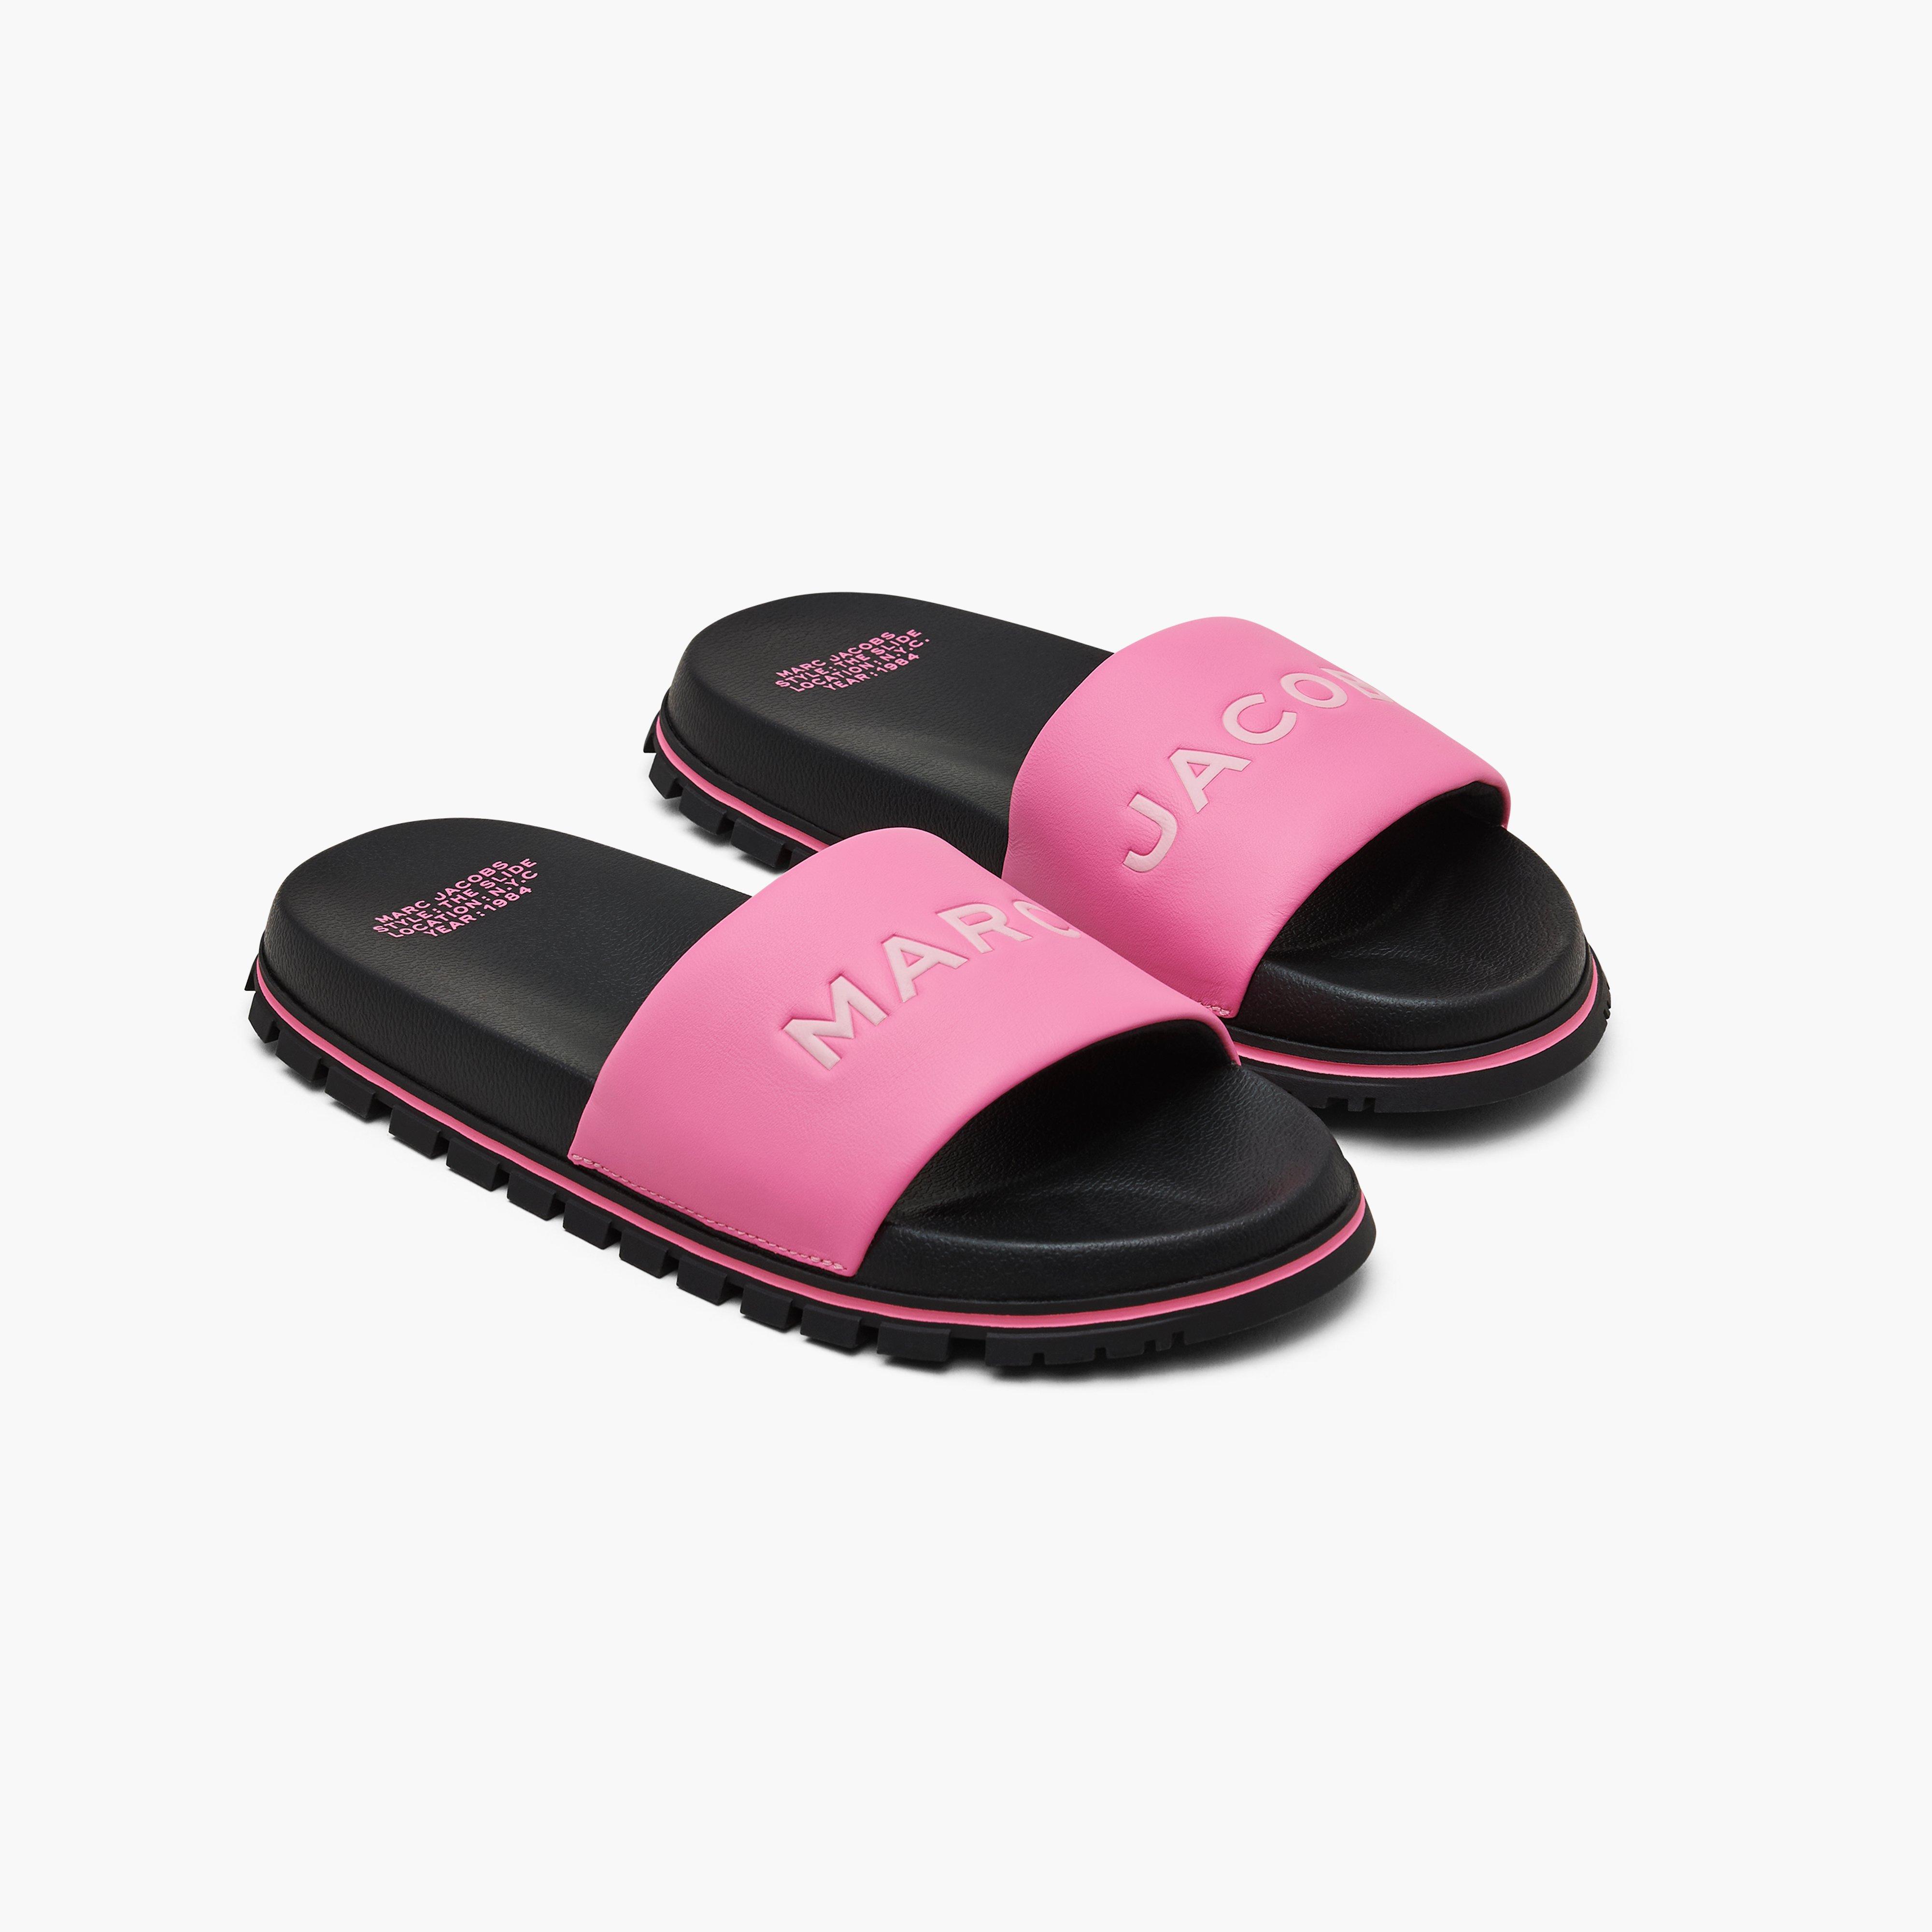 Marc by Marc jacobs The Slide,PETAL PINK